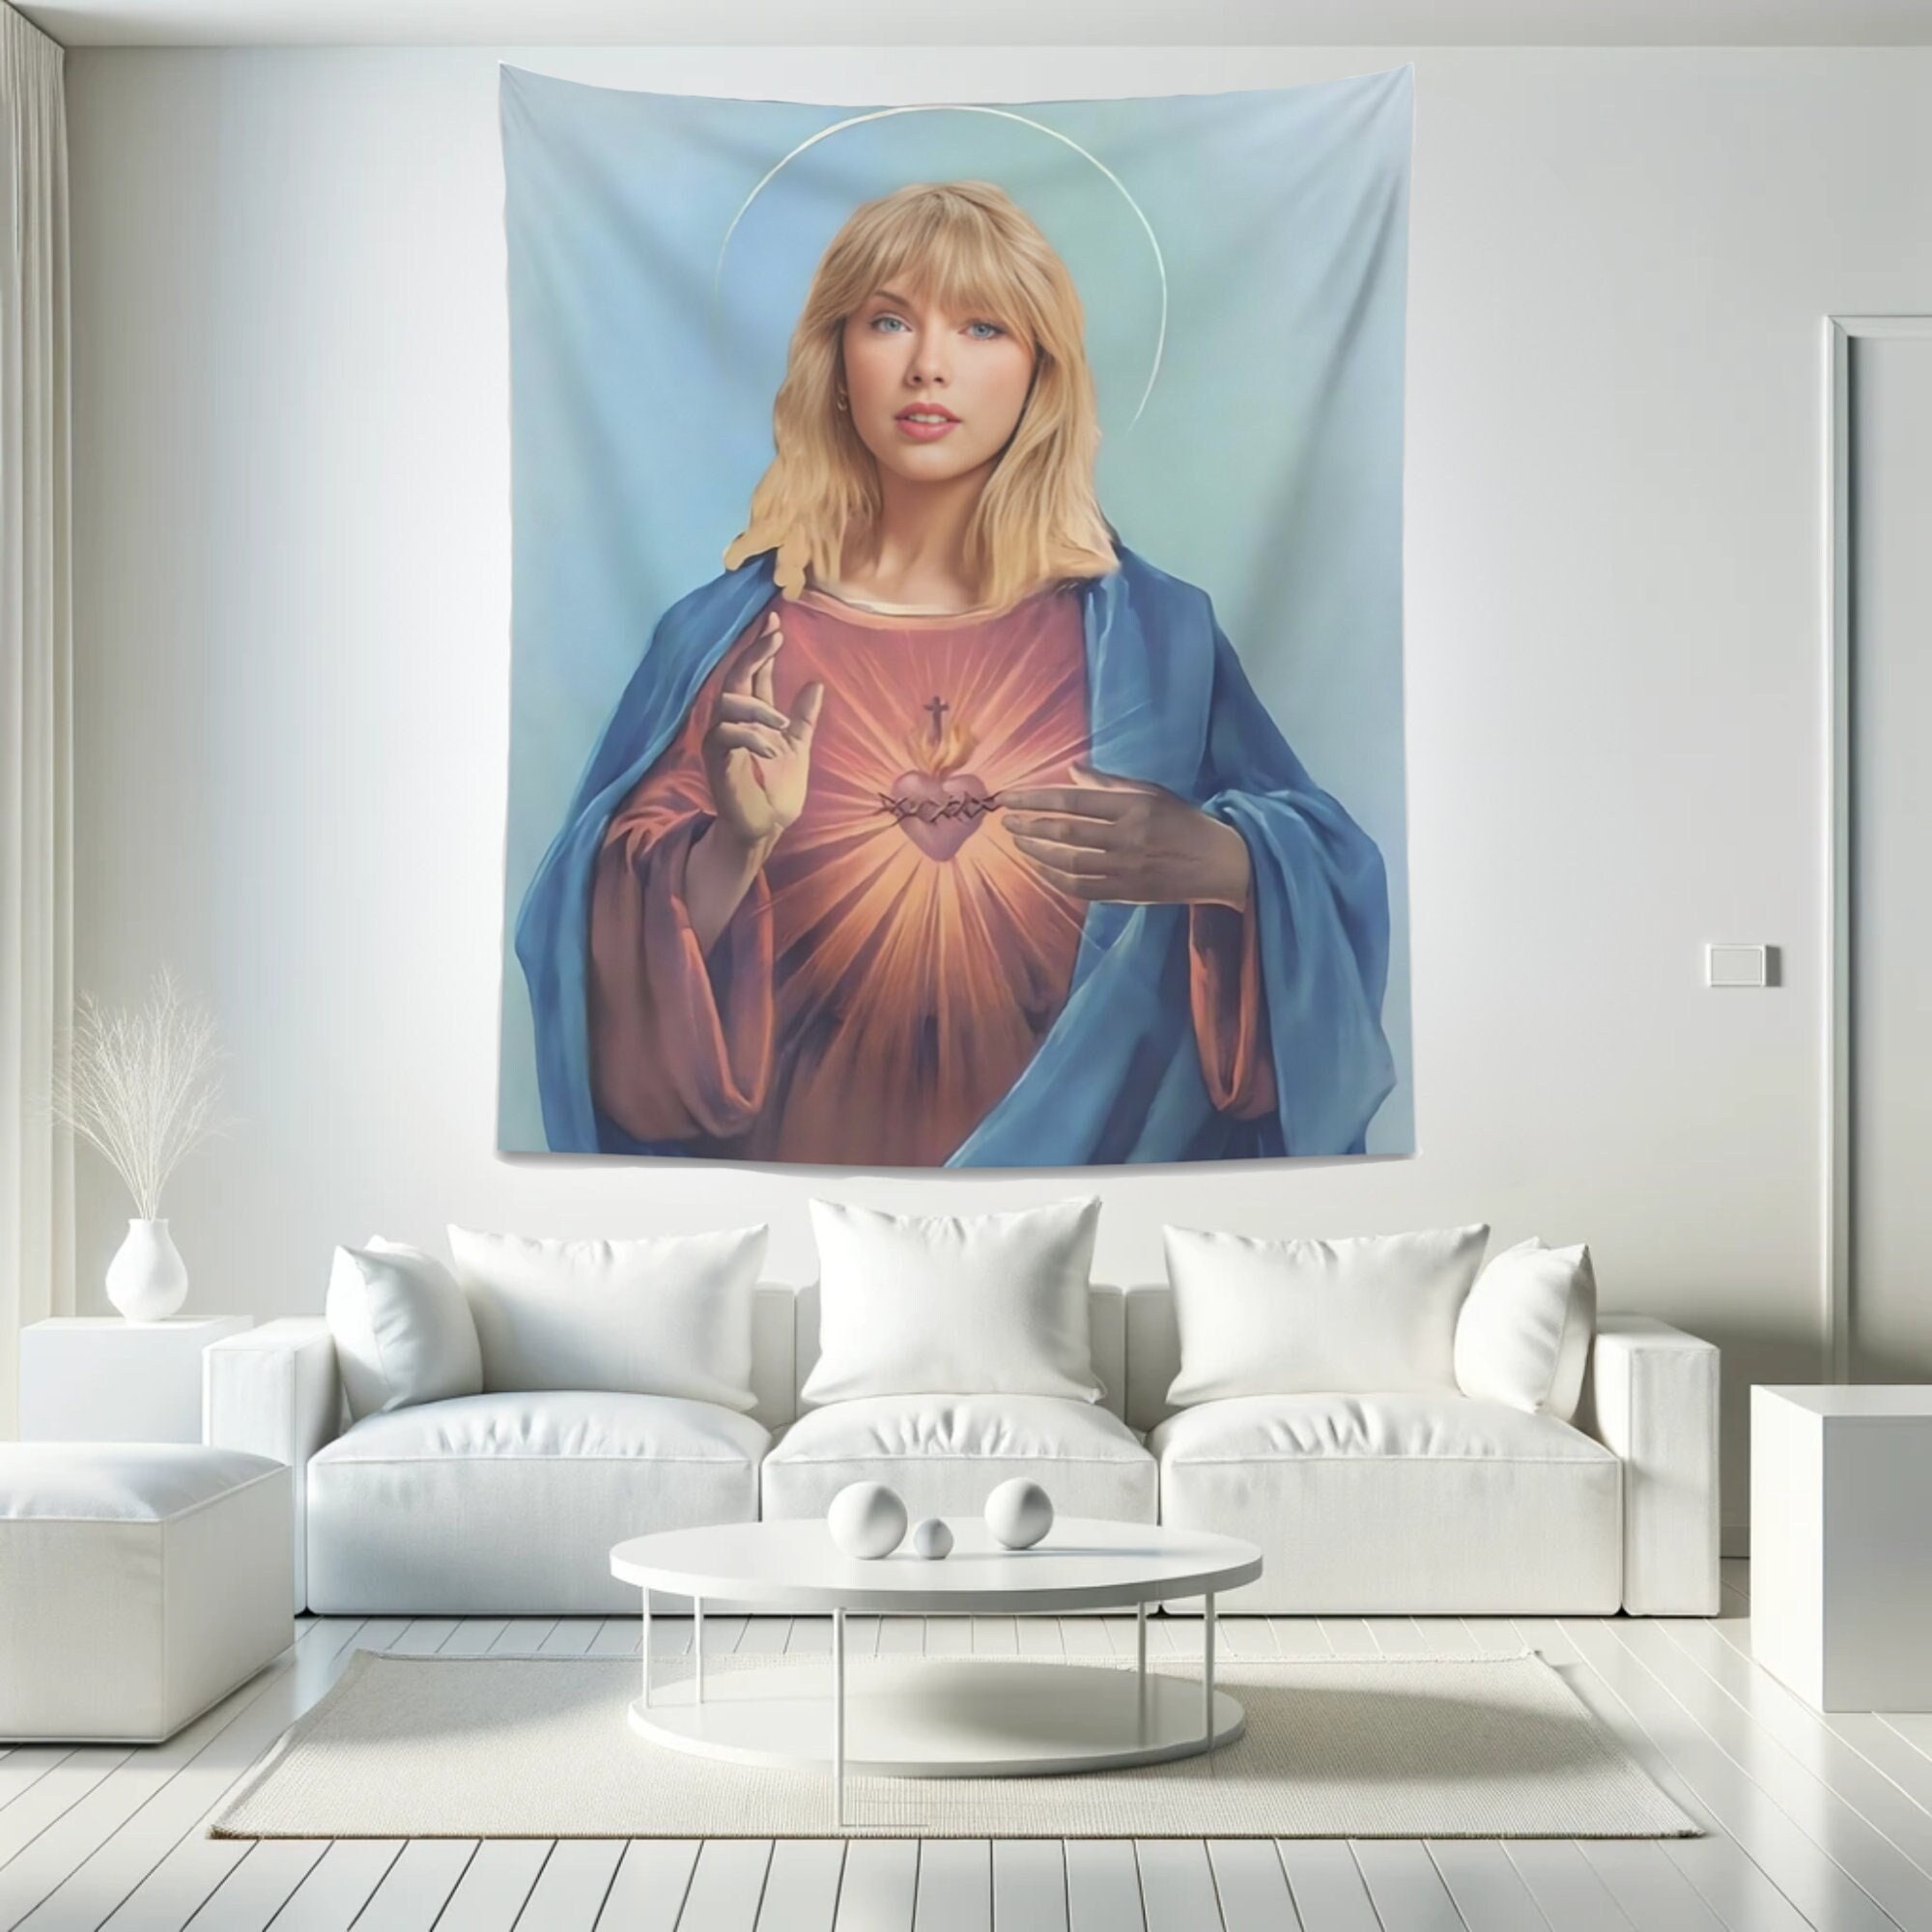 Famous Musician Taylor Tapestry Flag For Room College Dorm Bedroom Decor  Indoor And Outdoor Decoration